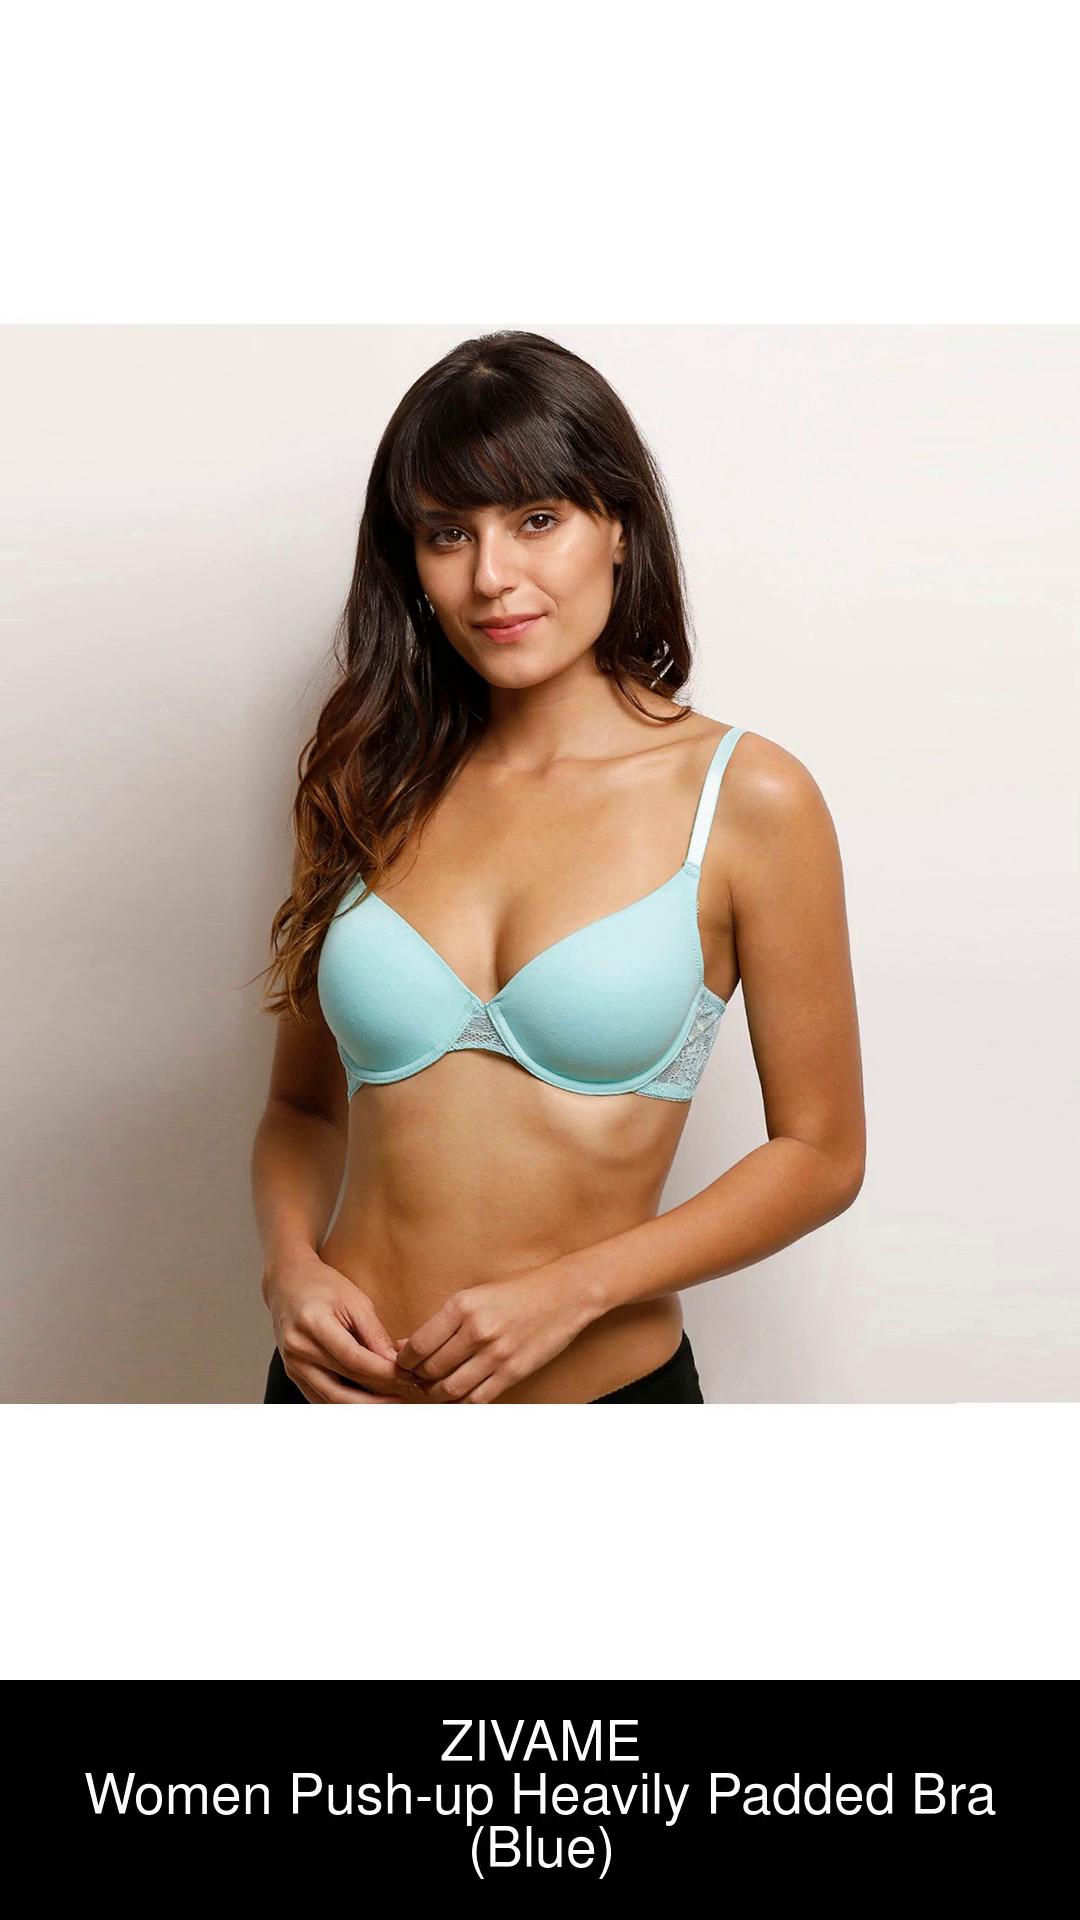 Zivame Nylon Spandex 32B Push Up Bra in Valsad - Dealers, Manufacturers &  Suppliers - Justdial